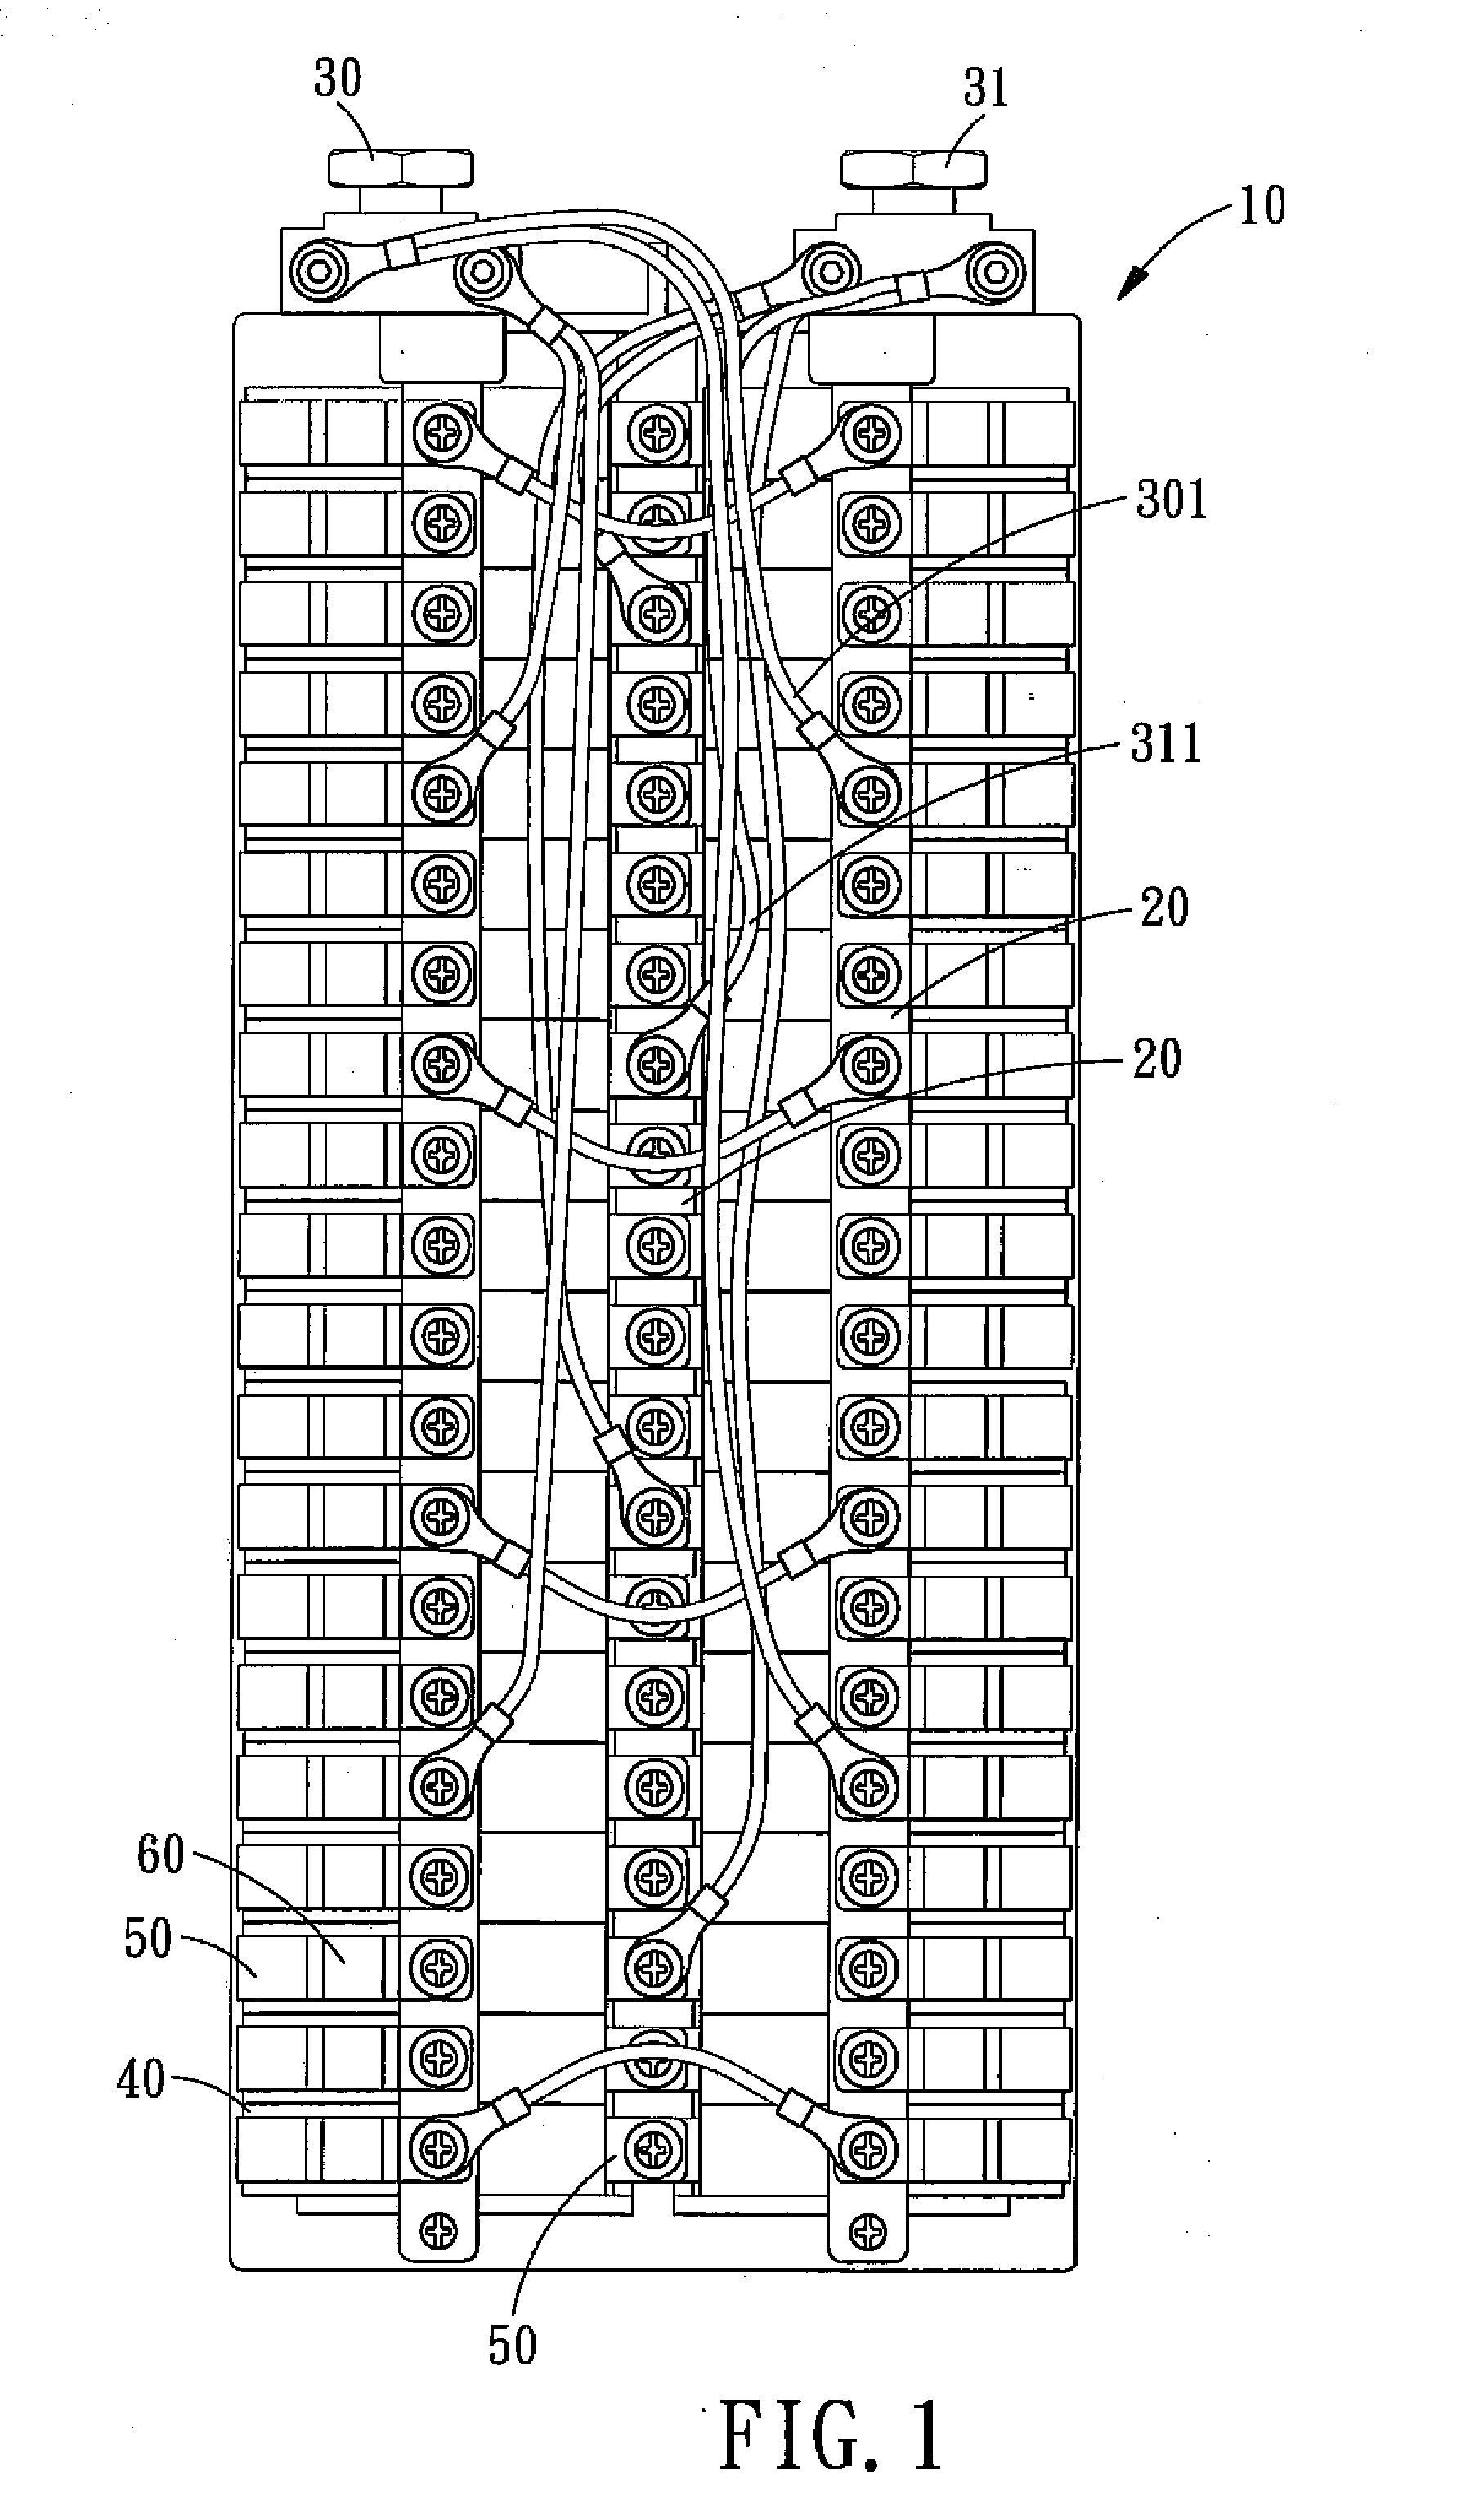 Independent Separating Type Power Battery Assembly